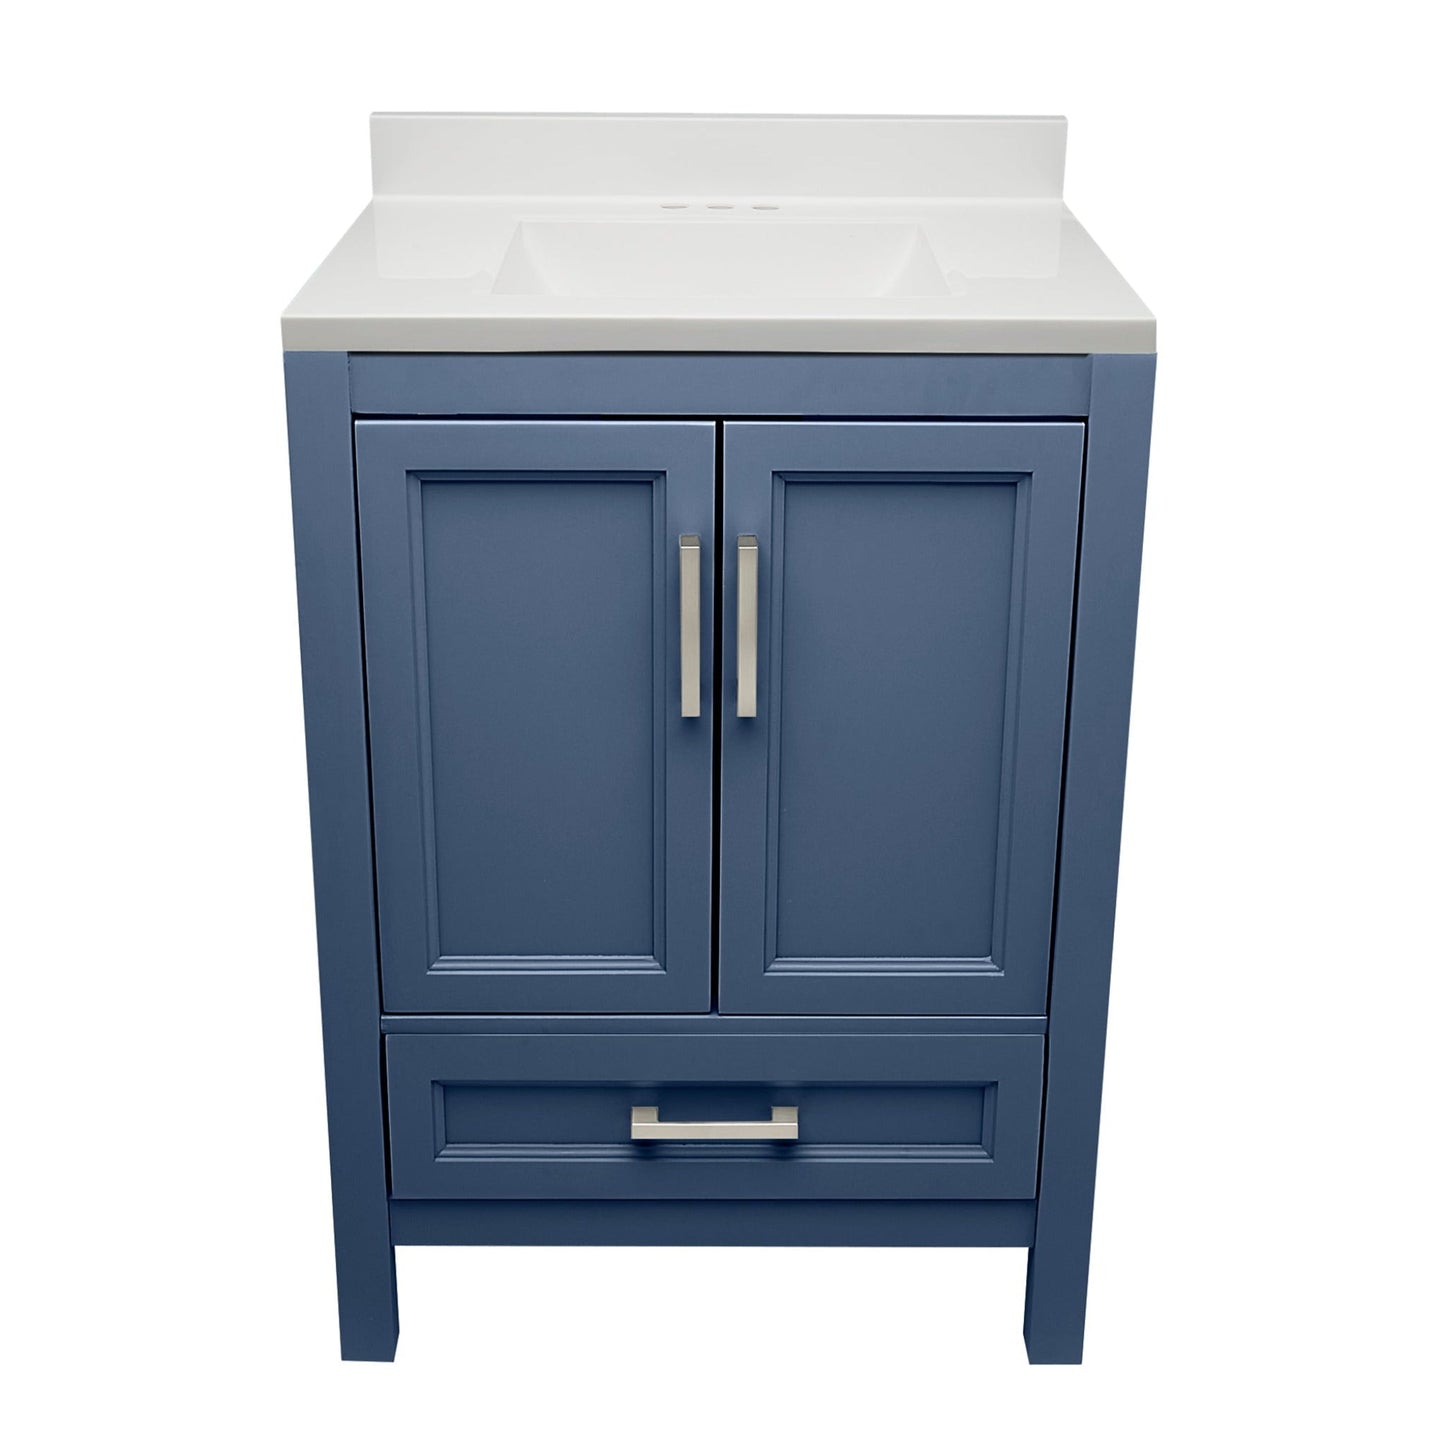 Ella’s Bubbles Nevado 25" Navy Blue Bathroom Vanity With White Cultured Marble Top With White Backsplash and Sink